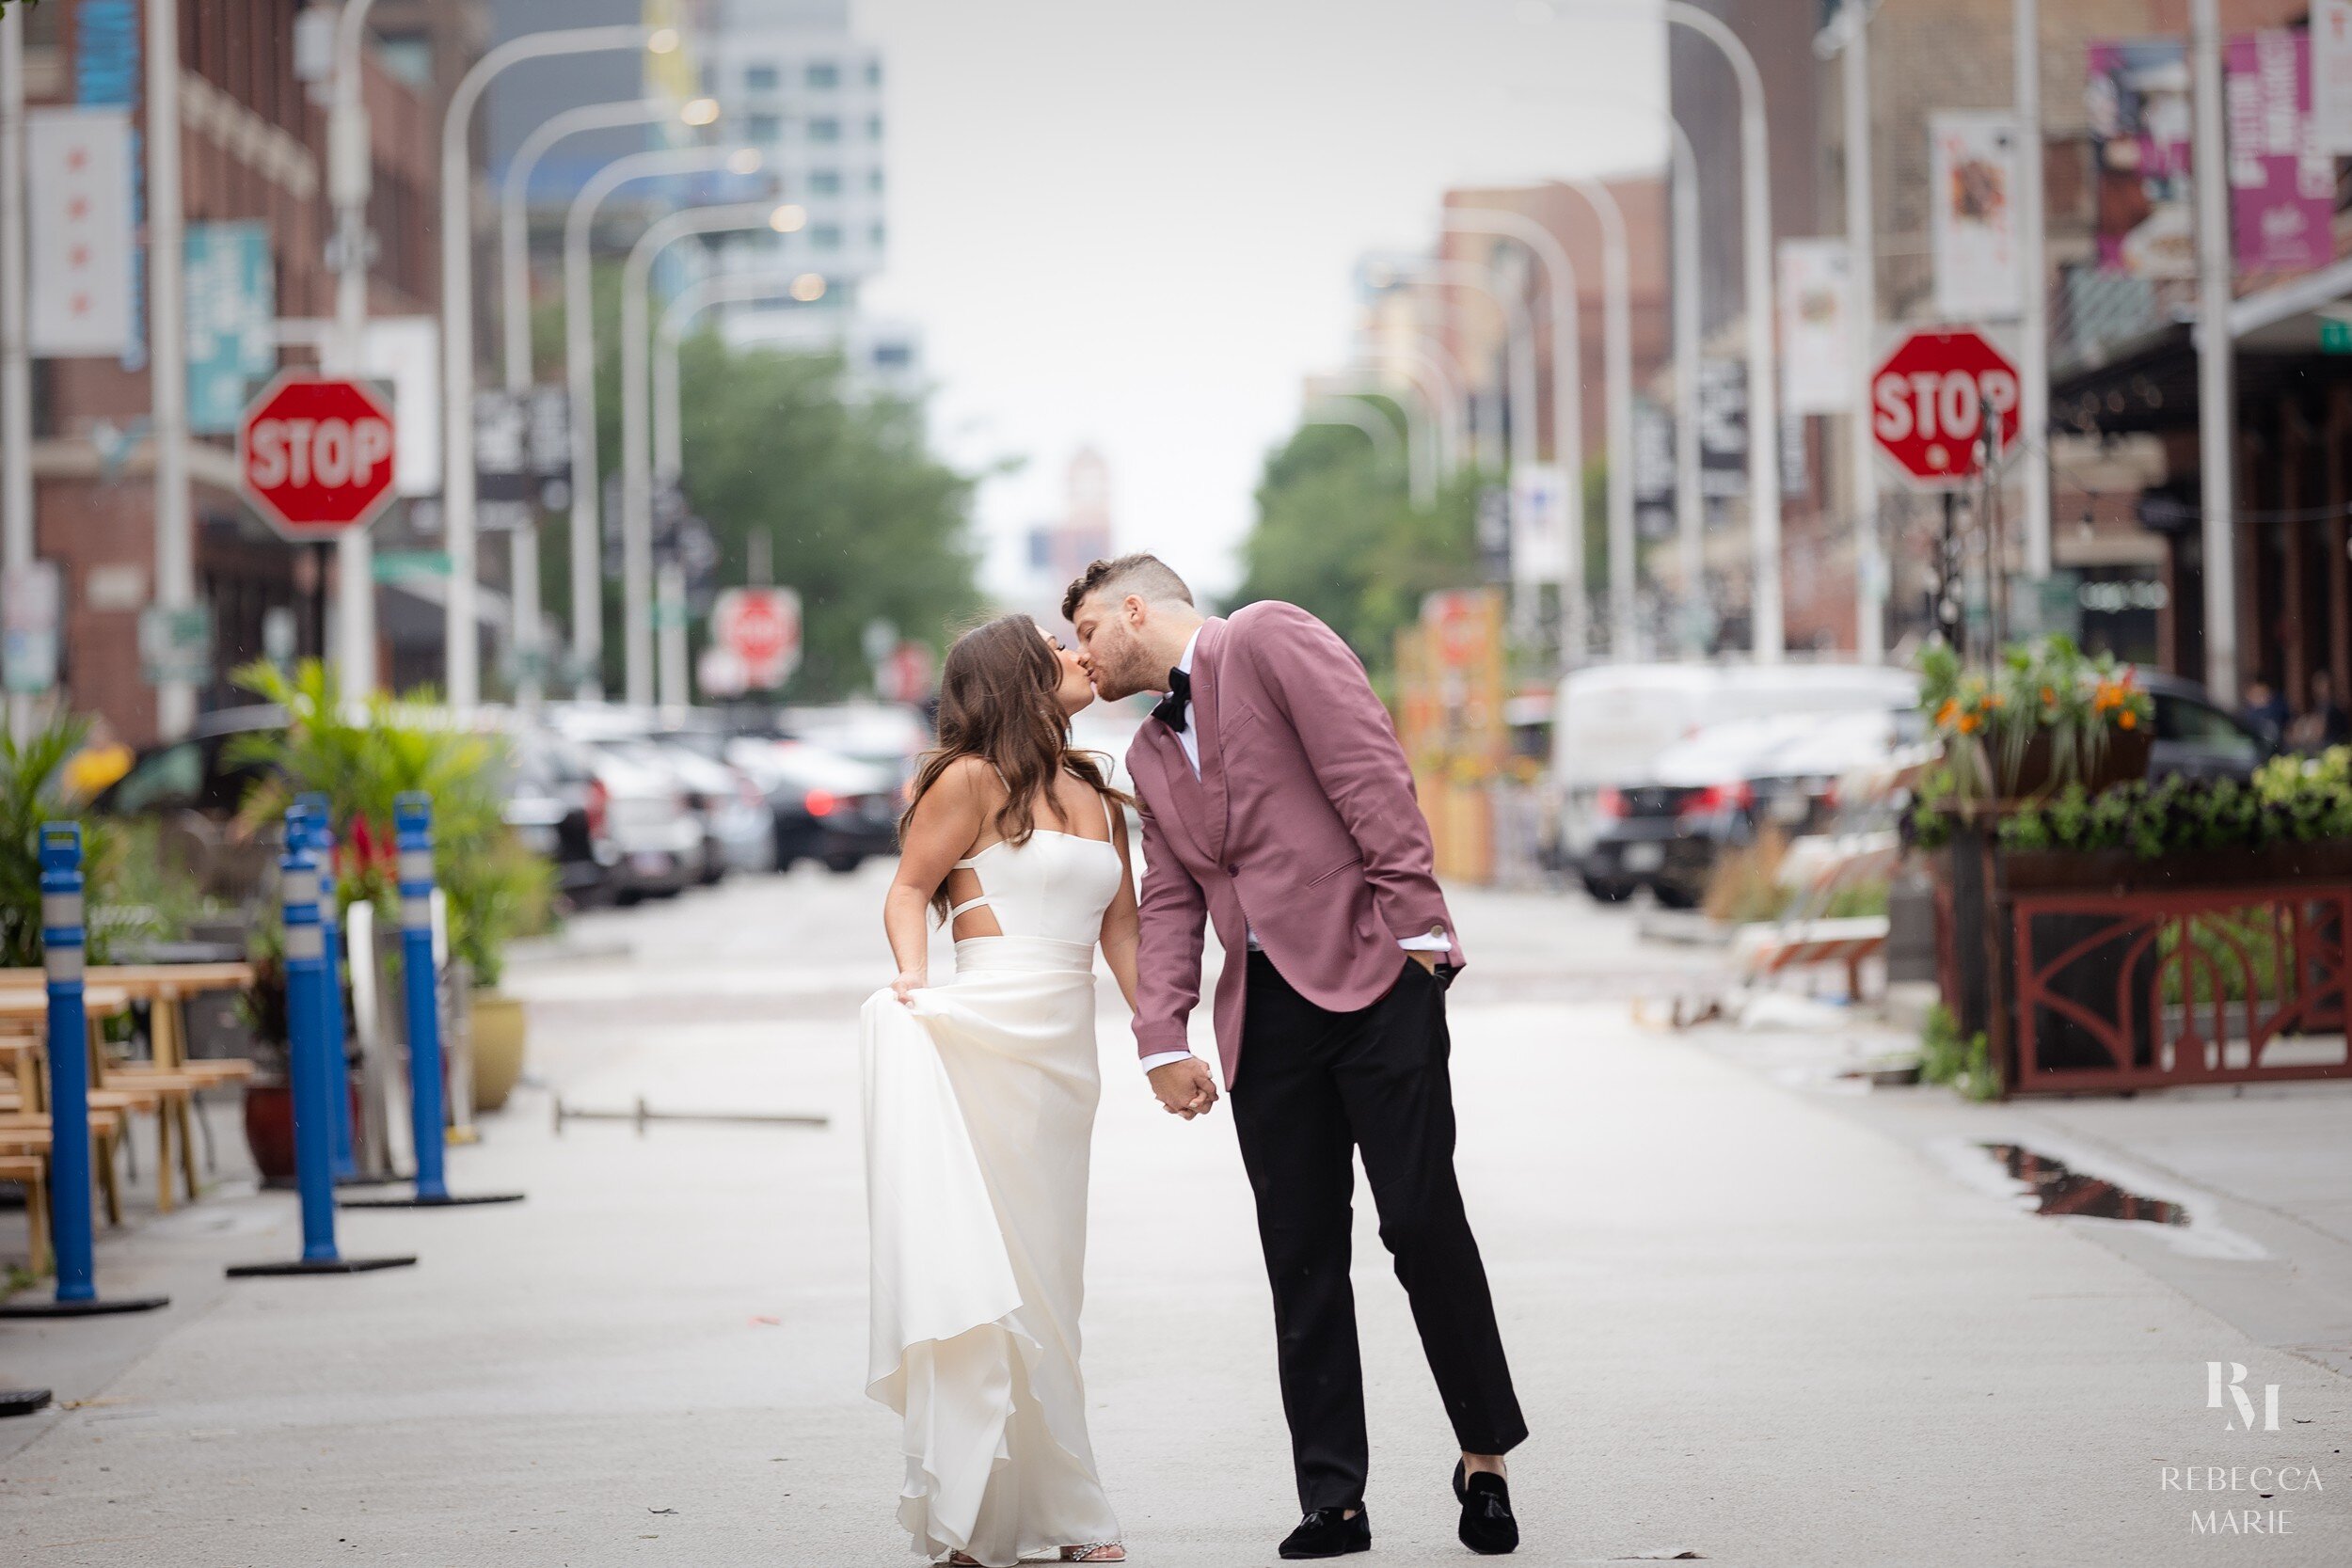 Dalcy-Chicago-Real-Wedding-Rebecca-Marie-Photography_0020.jpg